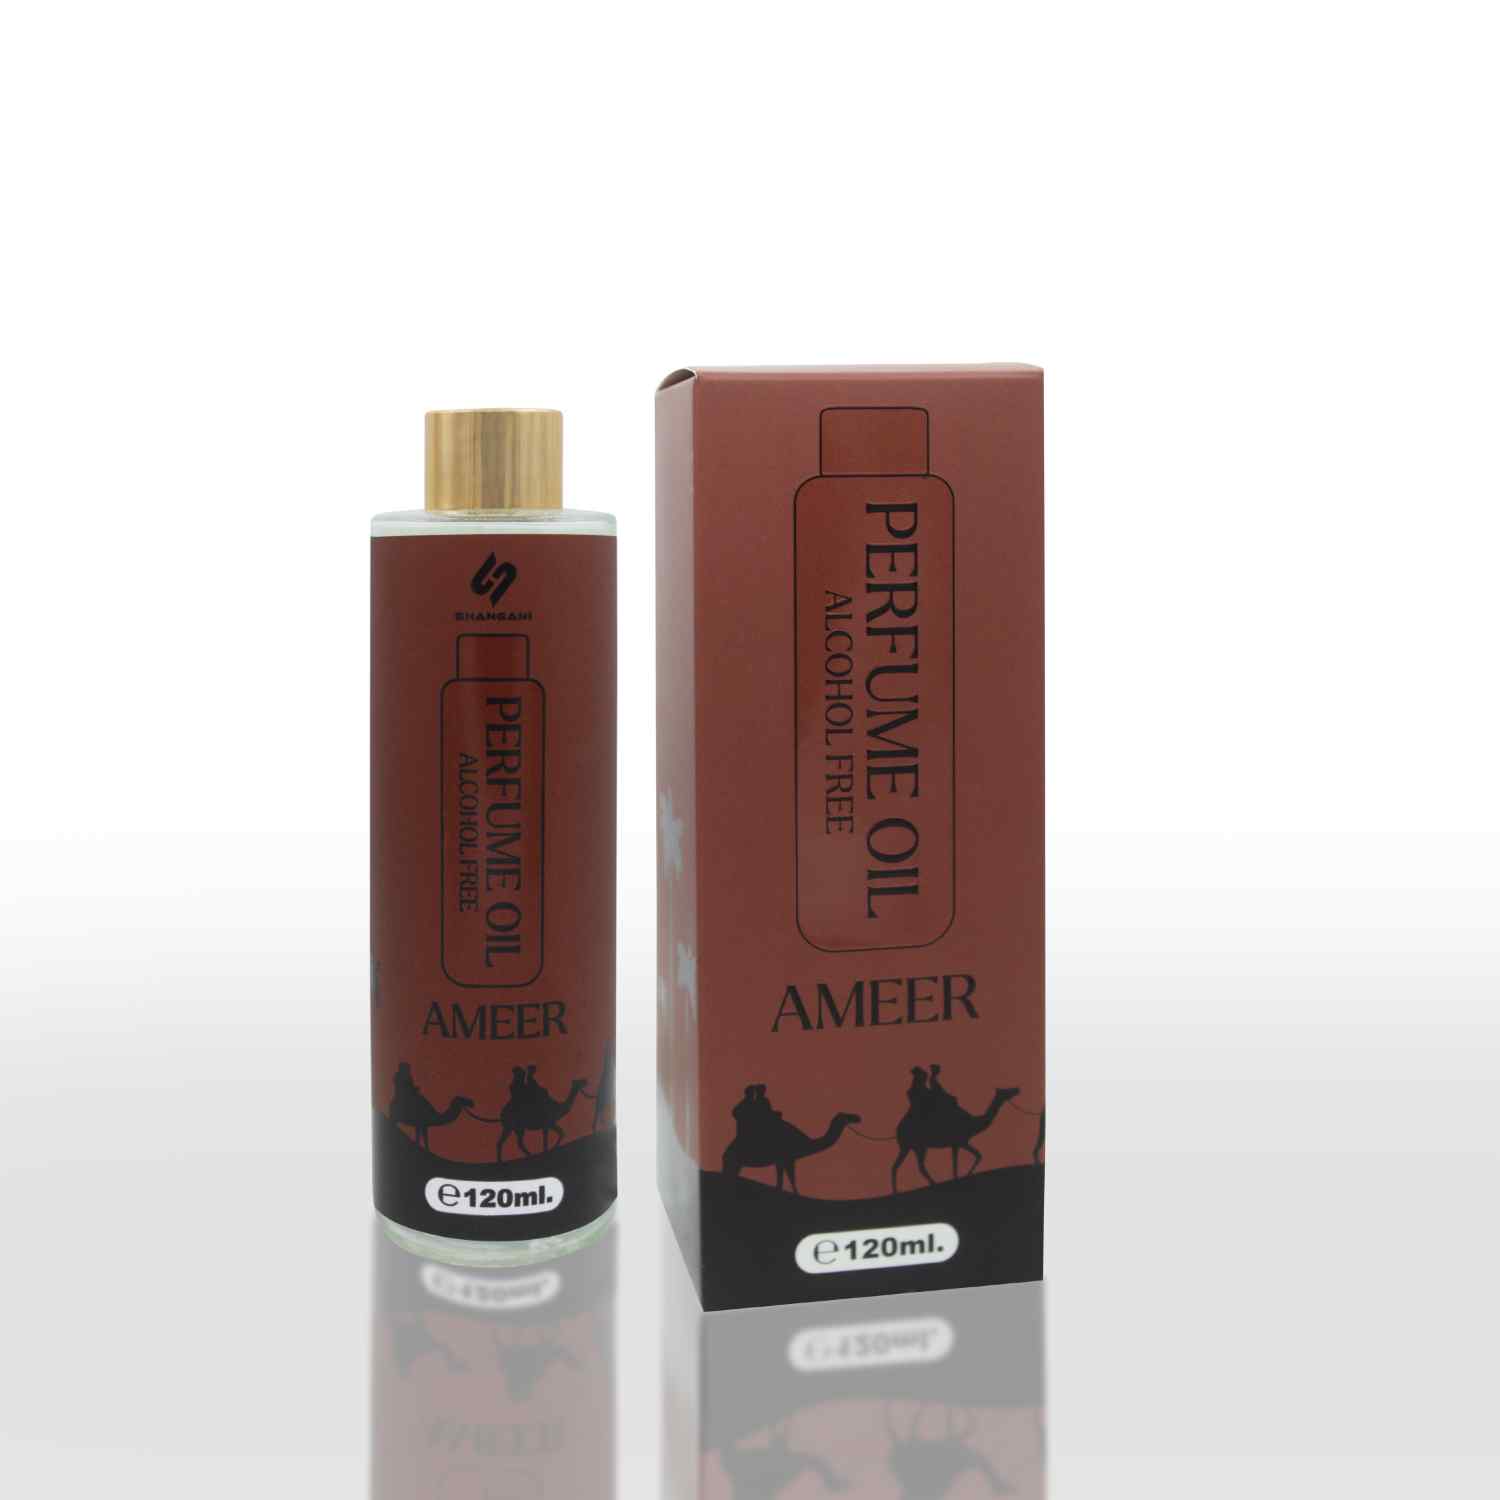 Ameer 120ml of Shangani which is Alcohol free perfume oil